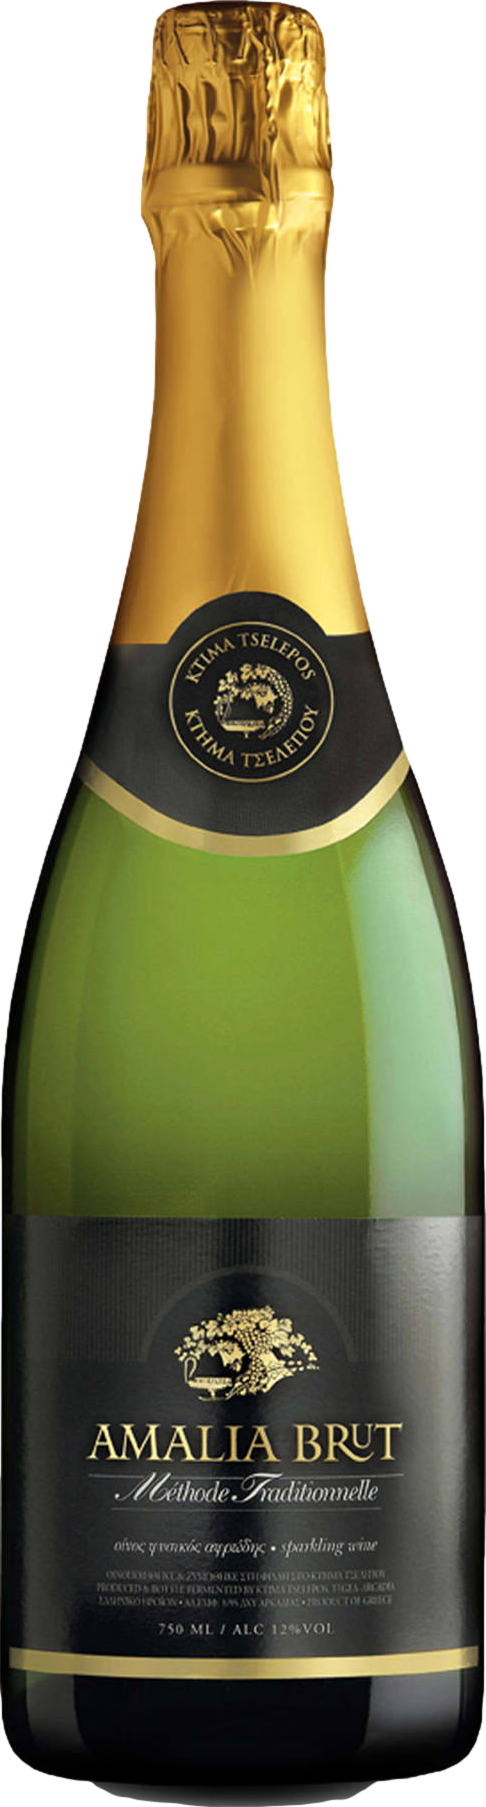 Was Now günstig Kaufen-Tselepos Amalia Brut 2017. Tselepos Amalia Brut 2017 <![CDATA[Drink it now or cellar for up to 10 years. No need to decant.          The Tselepos Estate was founded in 1989. Its founder Ghiannis Tselepos had conducted intense research on the Arcadian ecos